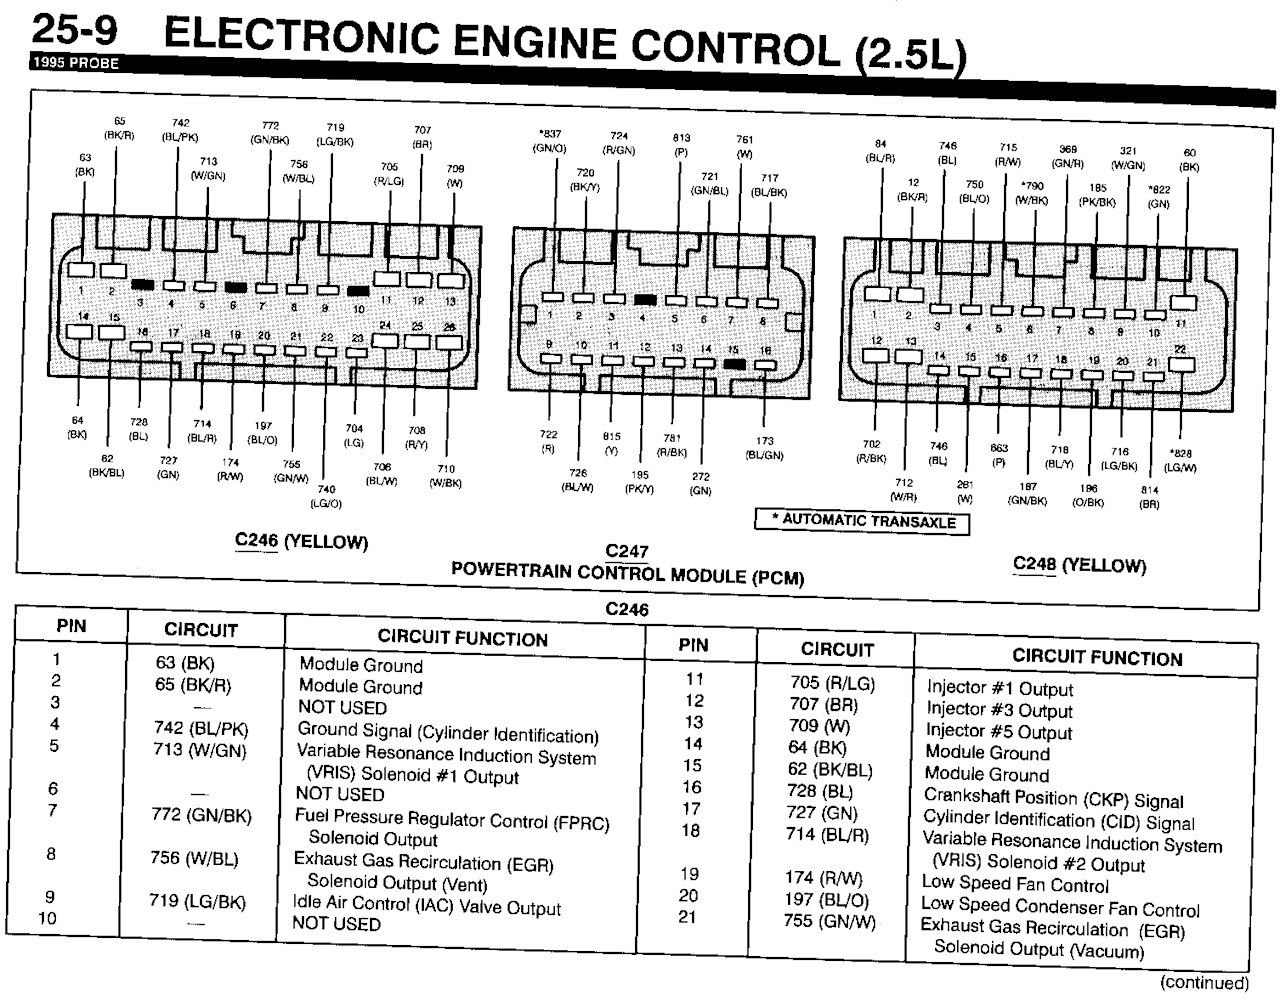 Ford Escort Ecu Piouts and Ignition Lay Out Ecu Of Ford Escort Ecu Piouts and Ignition Lay Out